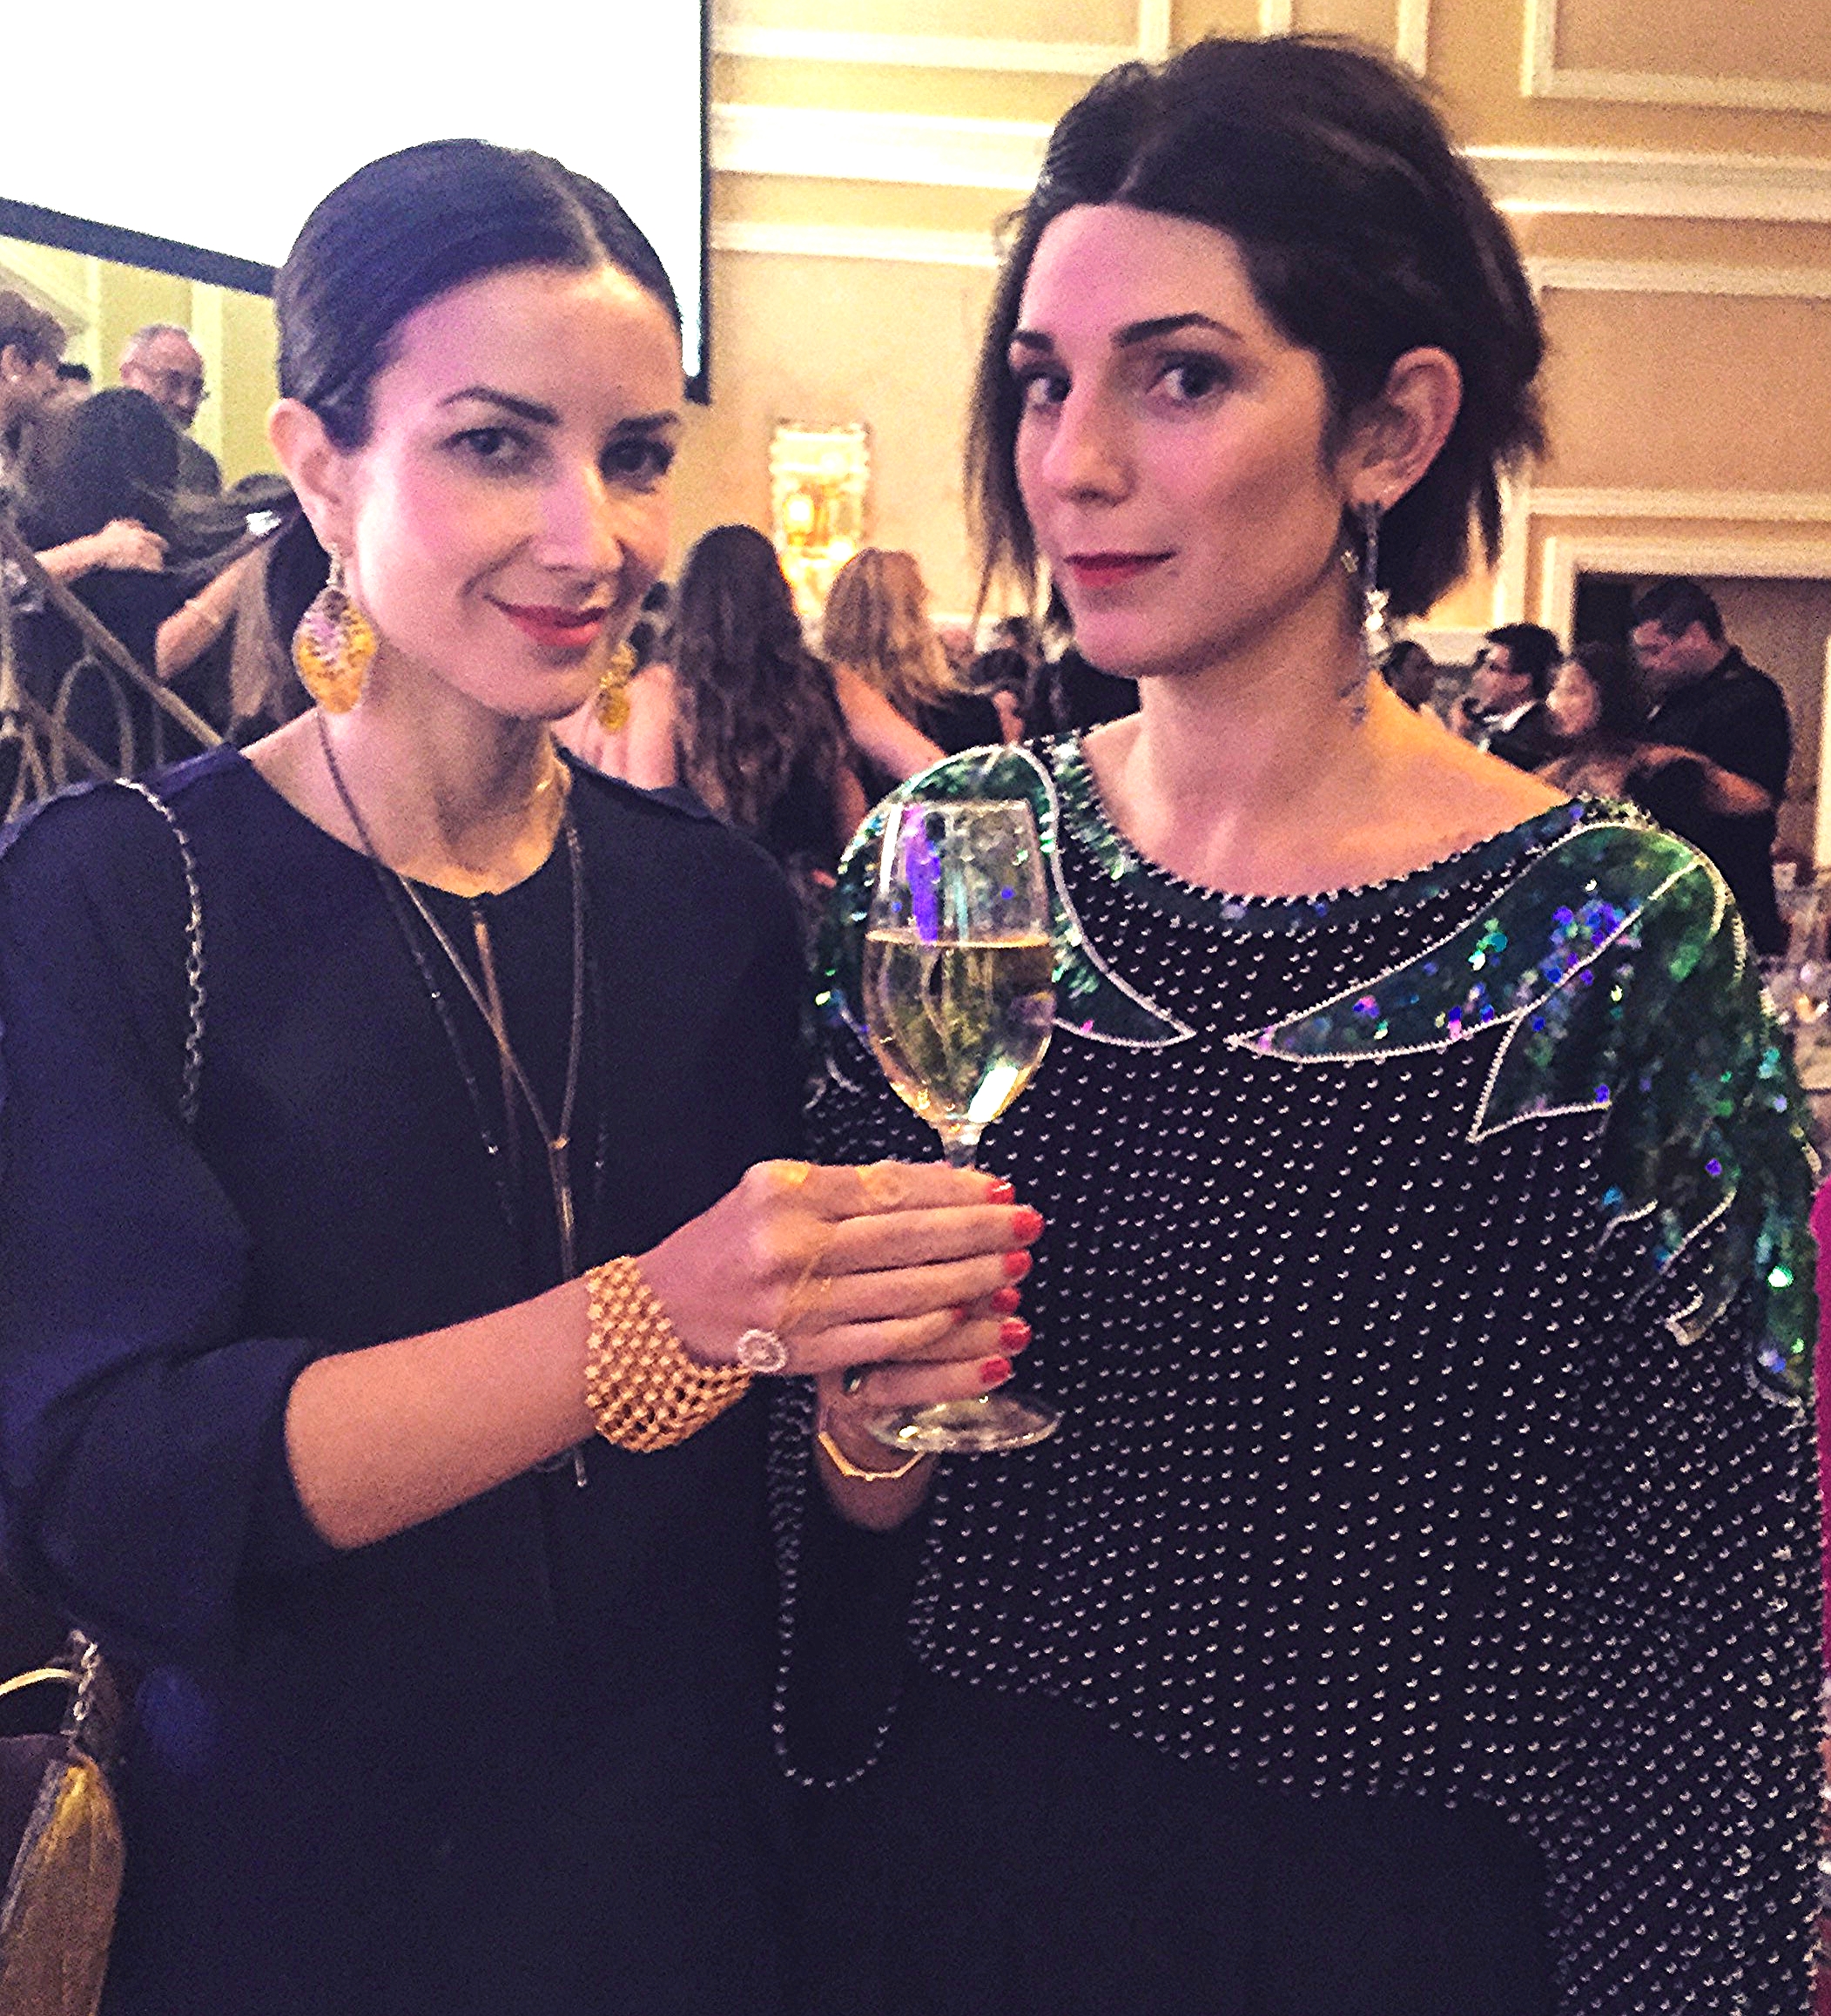  Randi wore&nbsp;Silvia's yellow orchid petal earrings to the 2015 Couture Design Awards. NBD.&nbsp; 